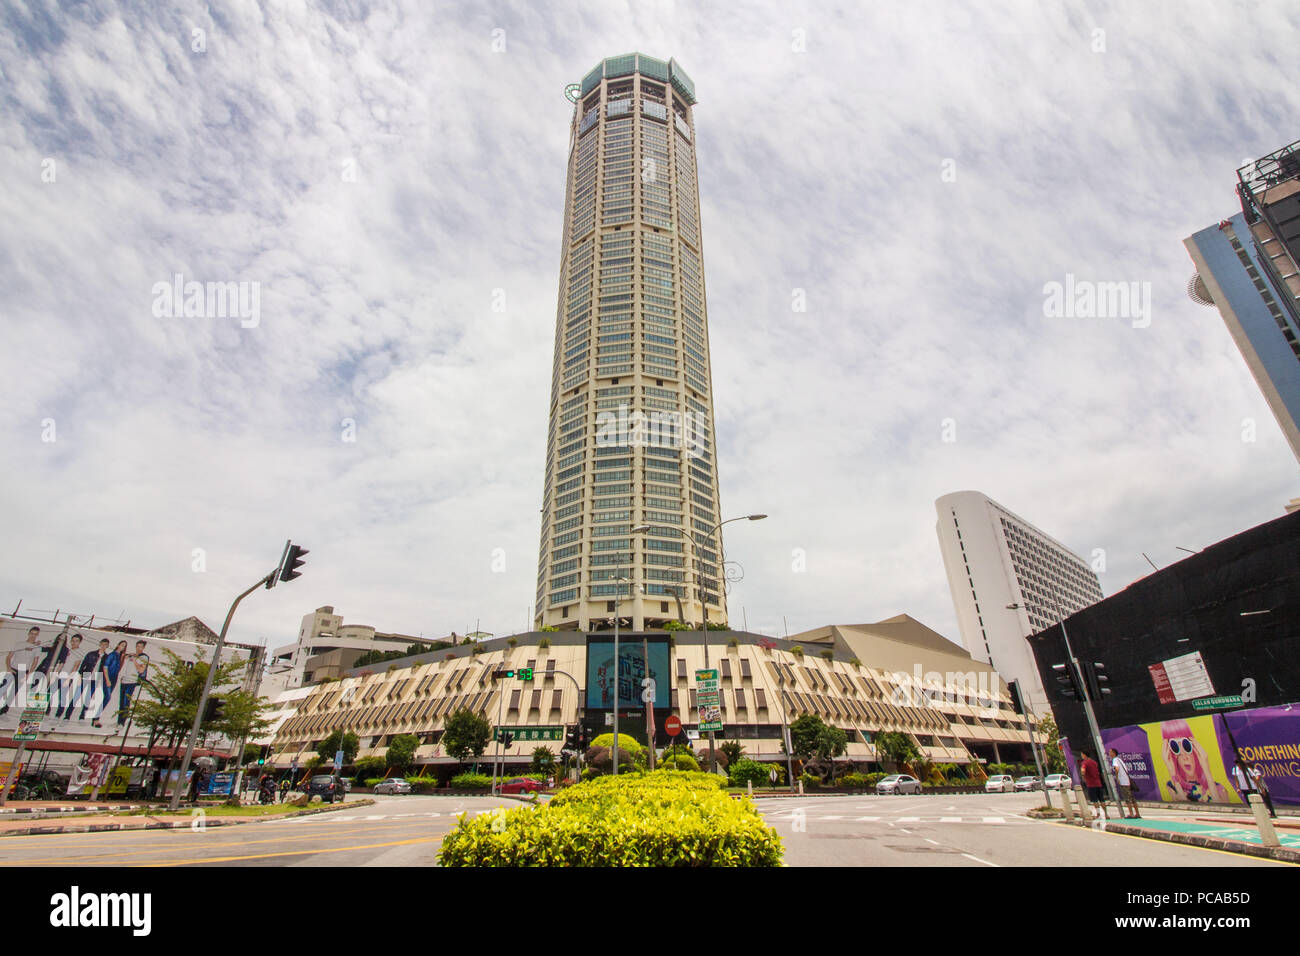 Komtar Penang is a 65-storey high rise tower in Georgetown, one of the most prominent landmarks in Penang, completed in 1986 and it is still the talle Stock Photo